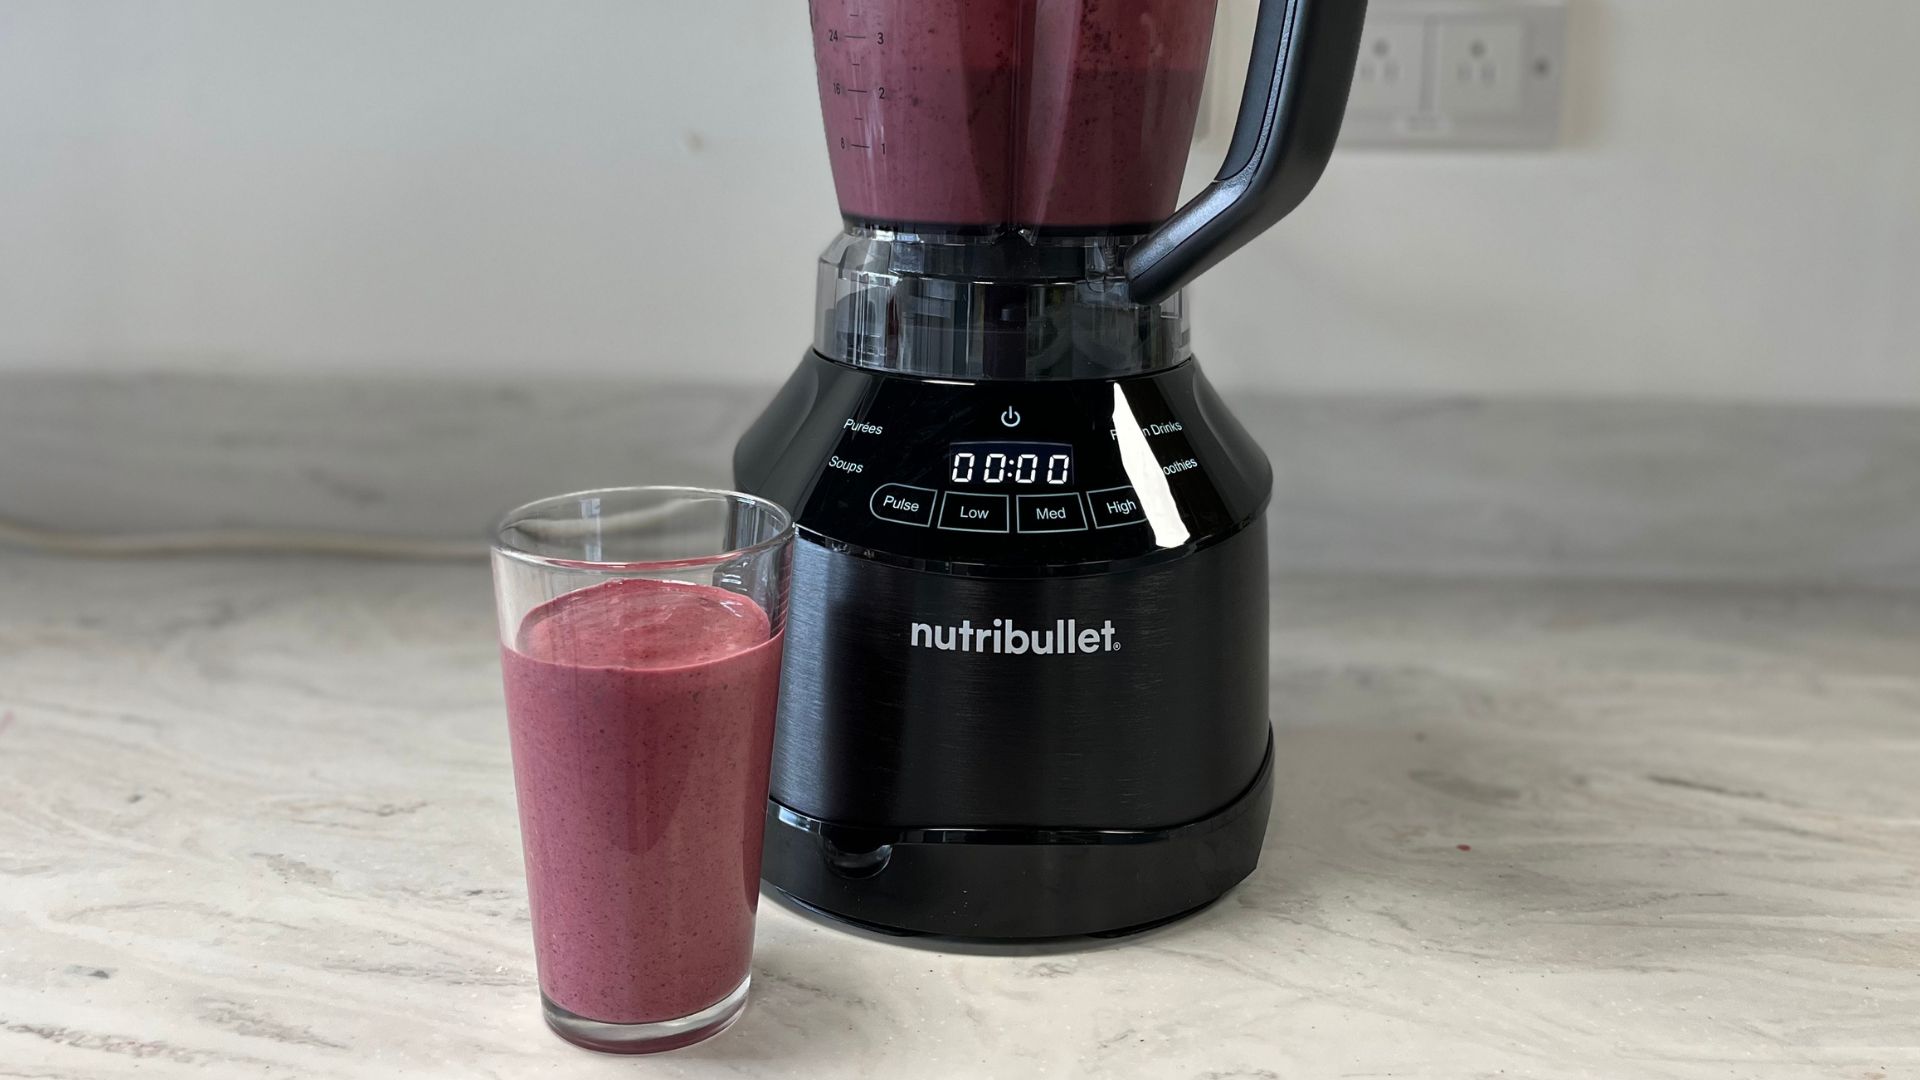 Nutribullet Smart Touch Blender Unboxing, Review, and How To Use